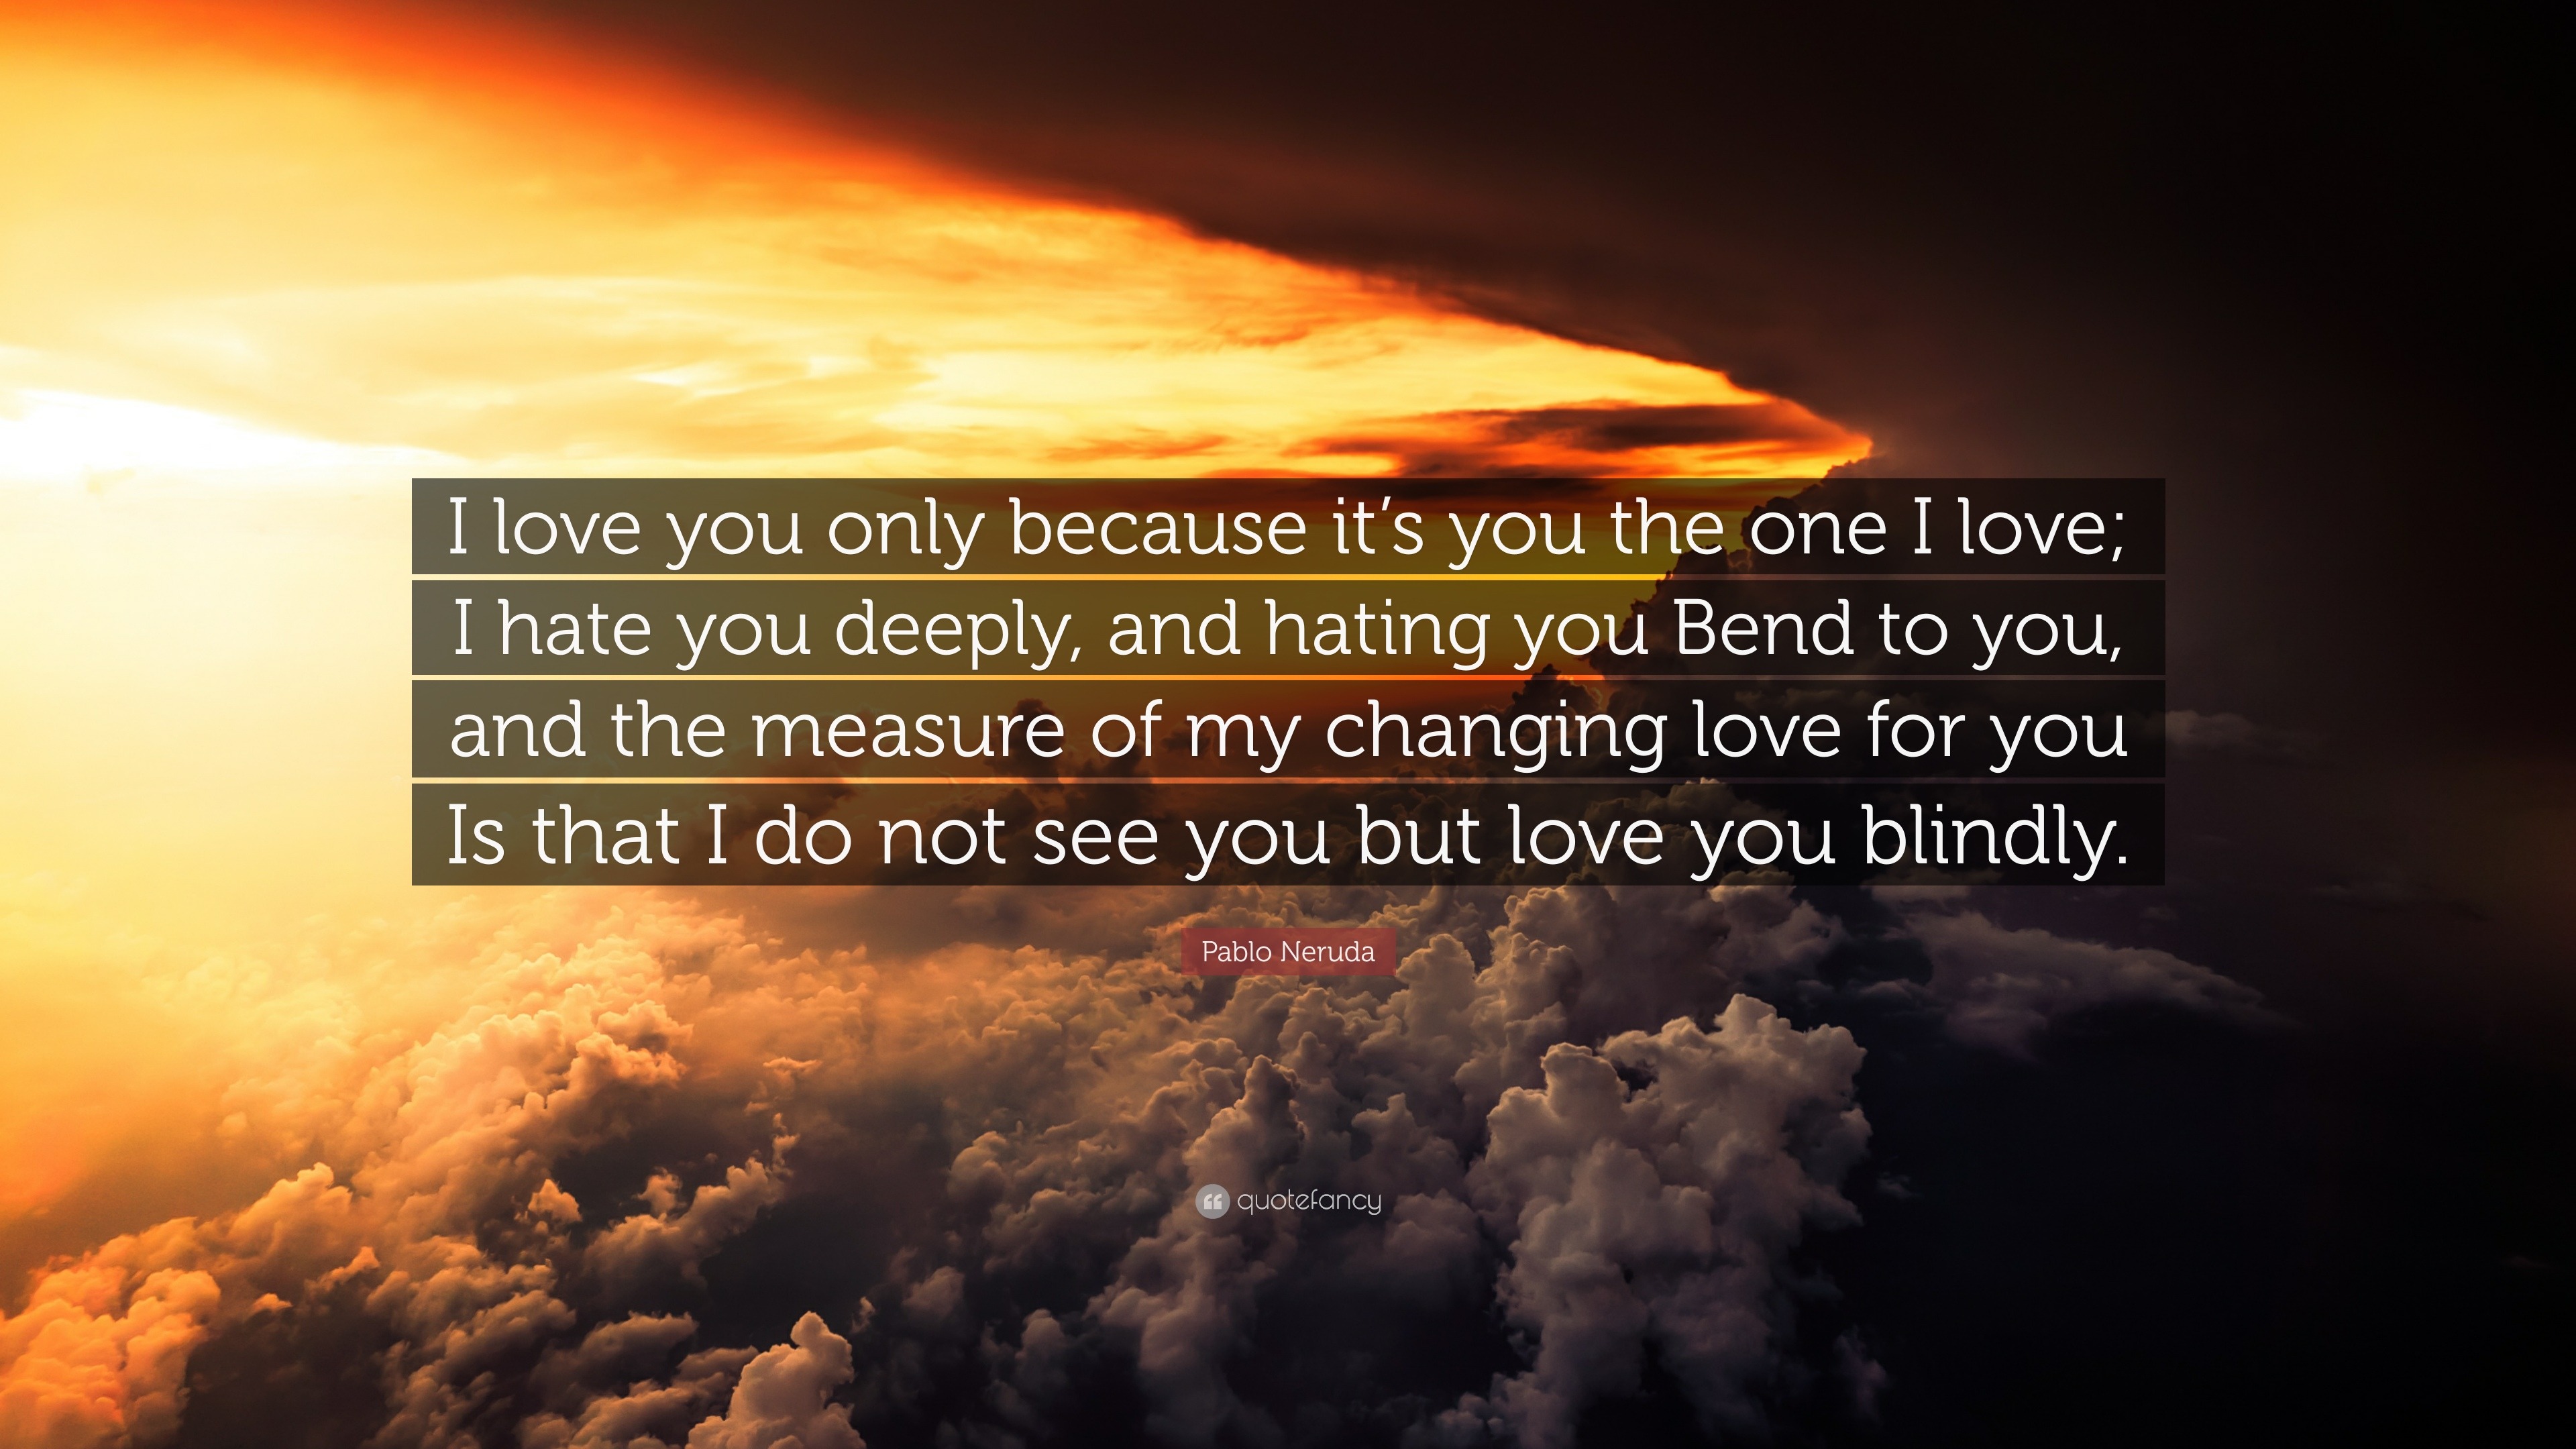 Pablo Neruda Quote “I love you only because it s you the one I love